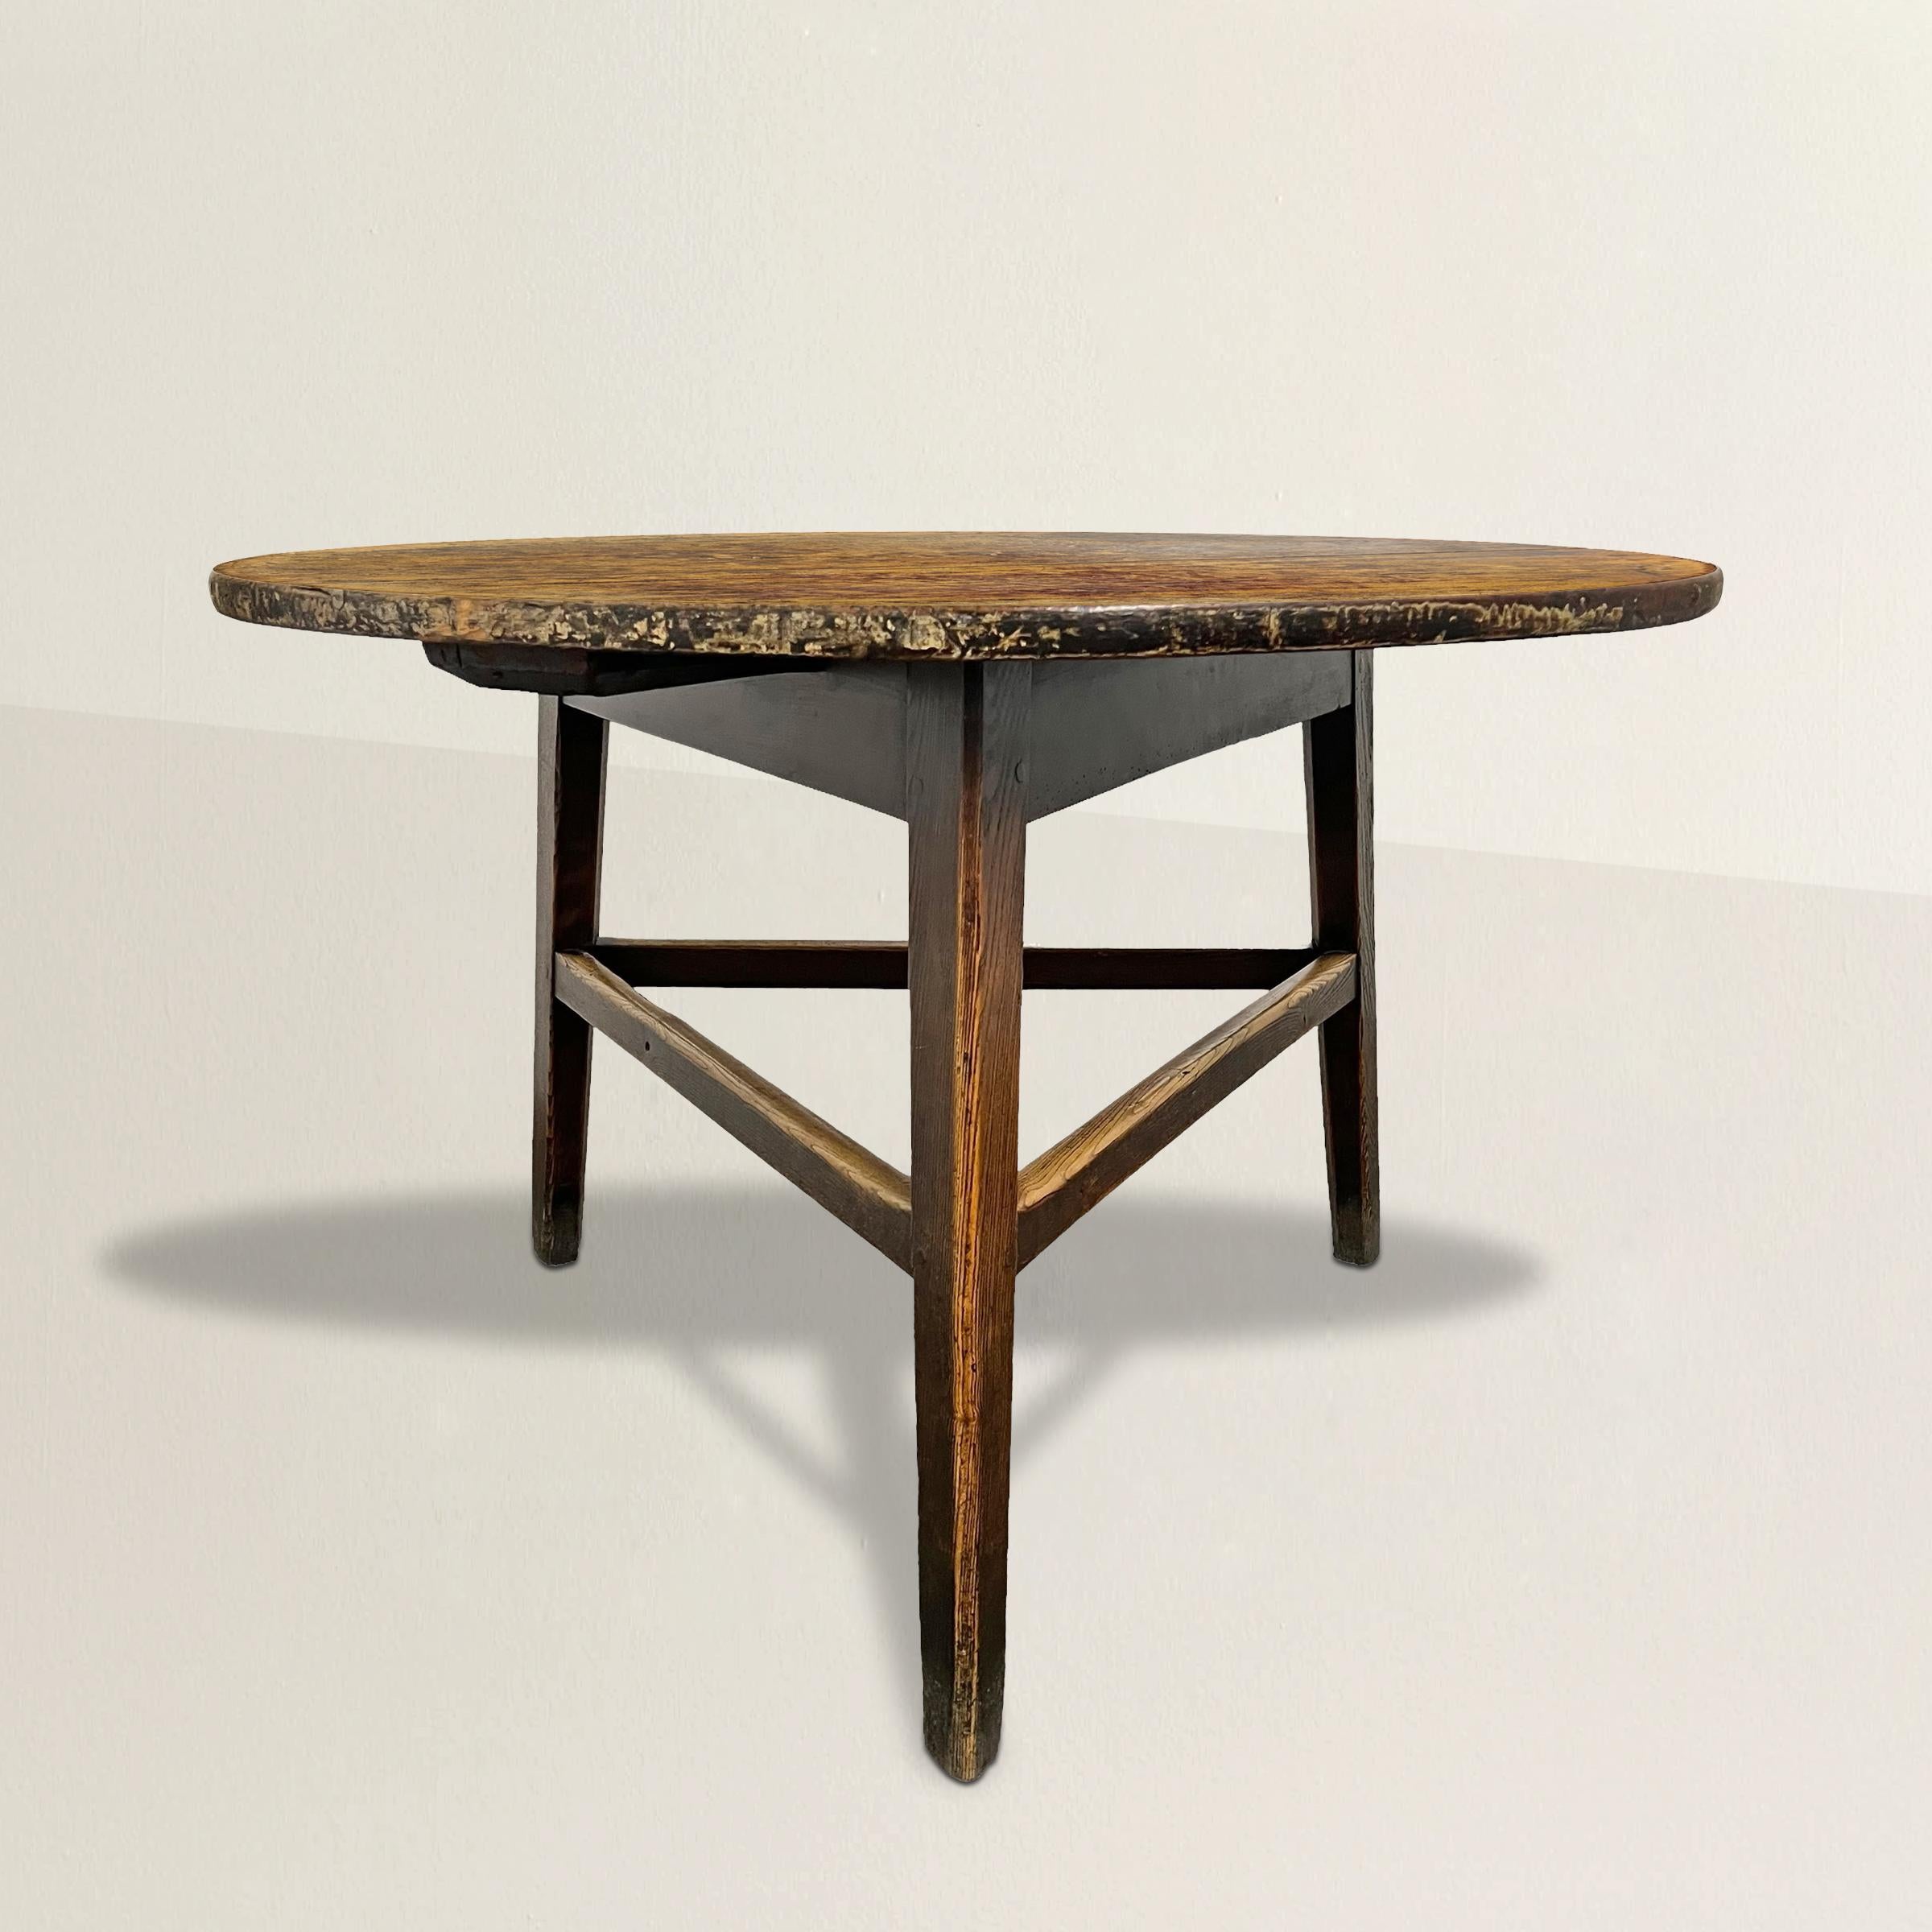 Standing as a testament to 19th-century English craftsmanship, this exceptionally large cricket table is a captivating piece of furniture. Its round top boasts a patina that tells the tale of years gone by. Supported by three elegantly tapered legs,